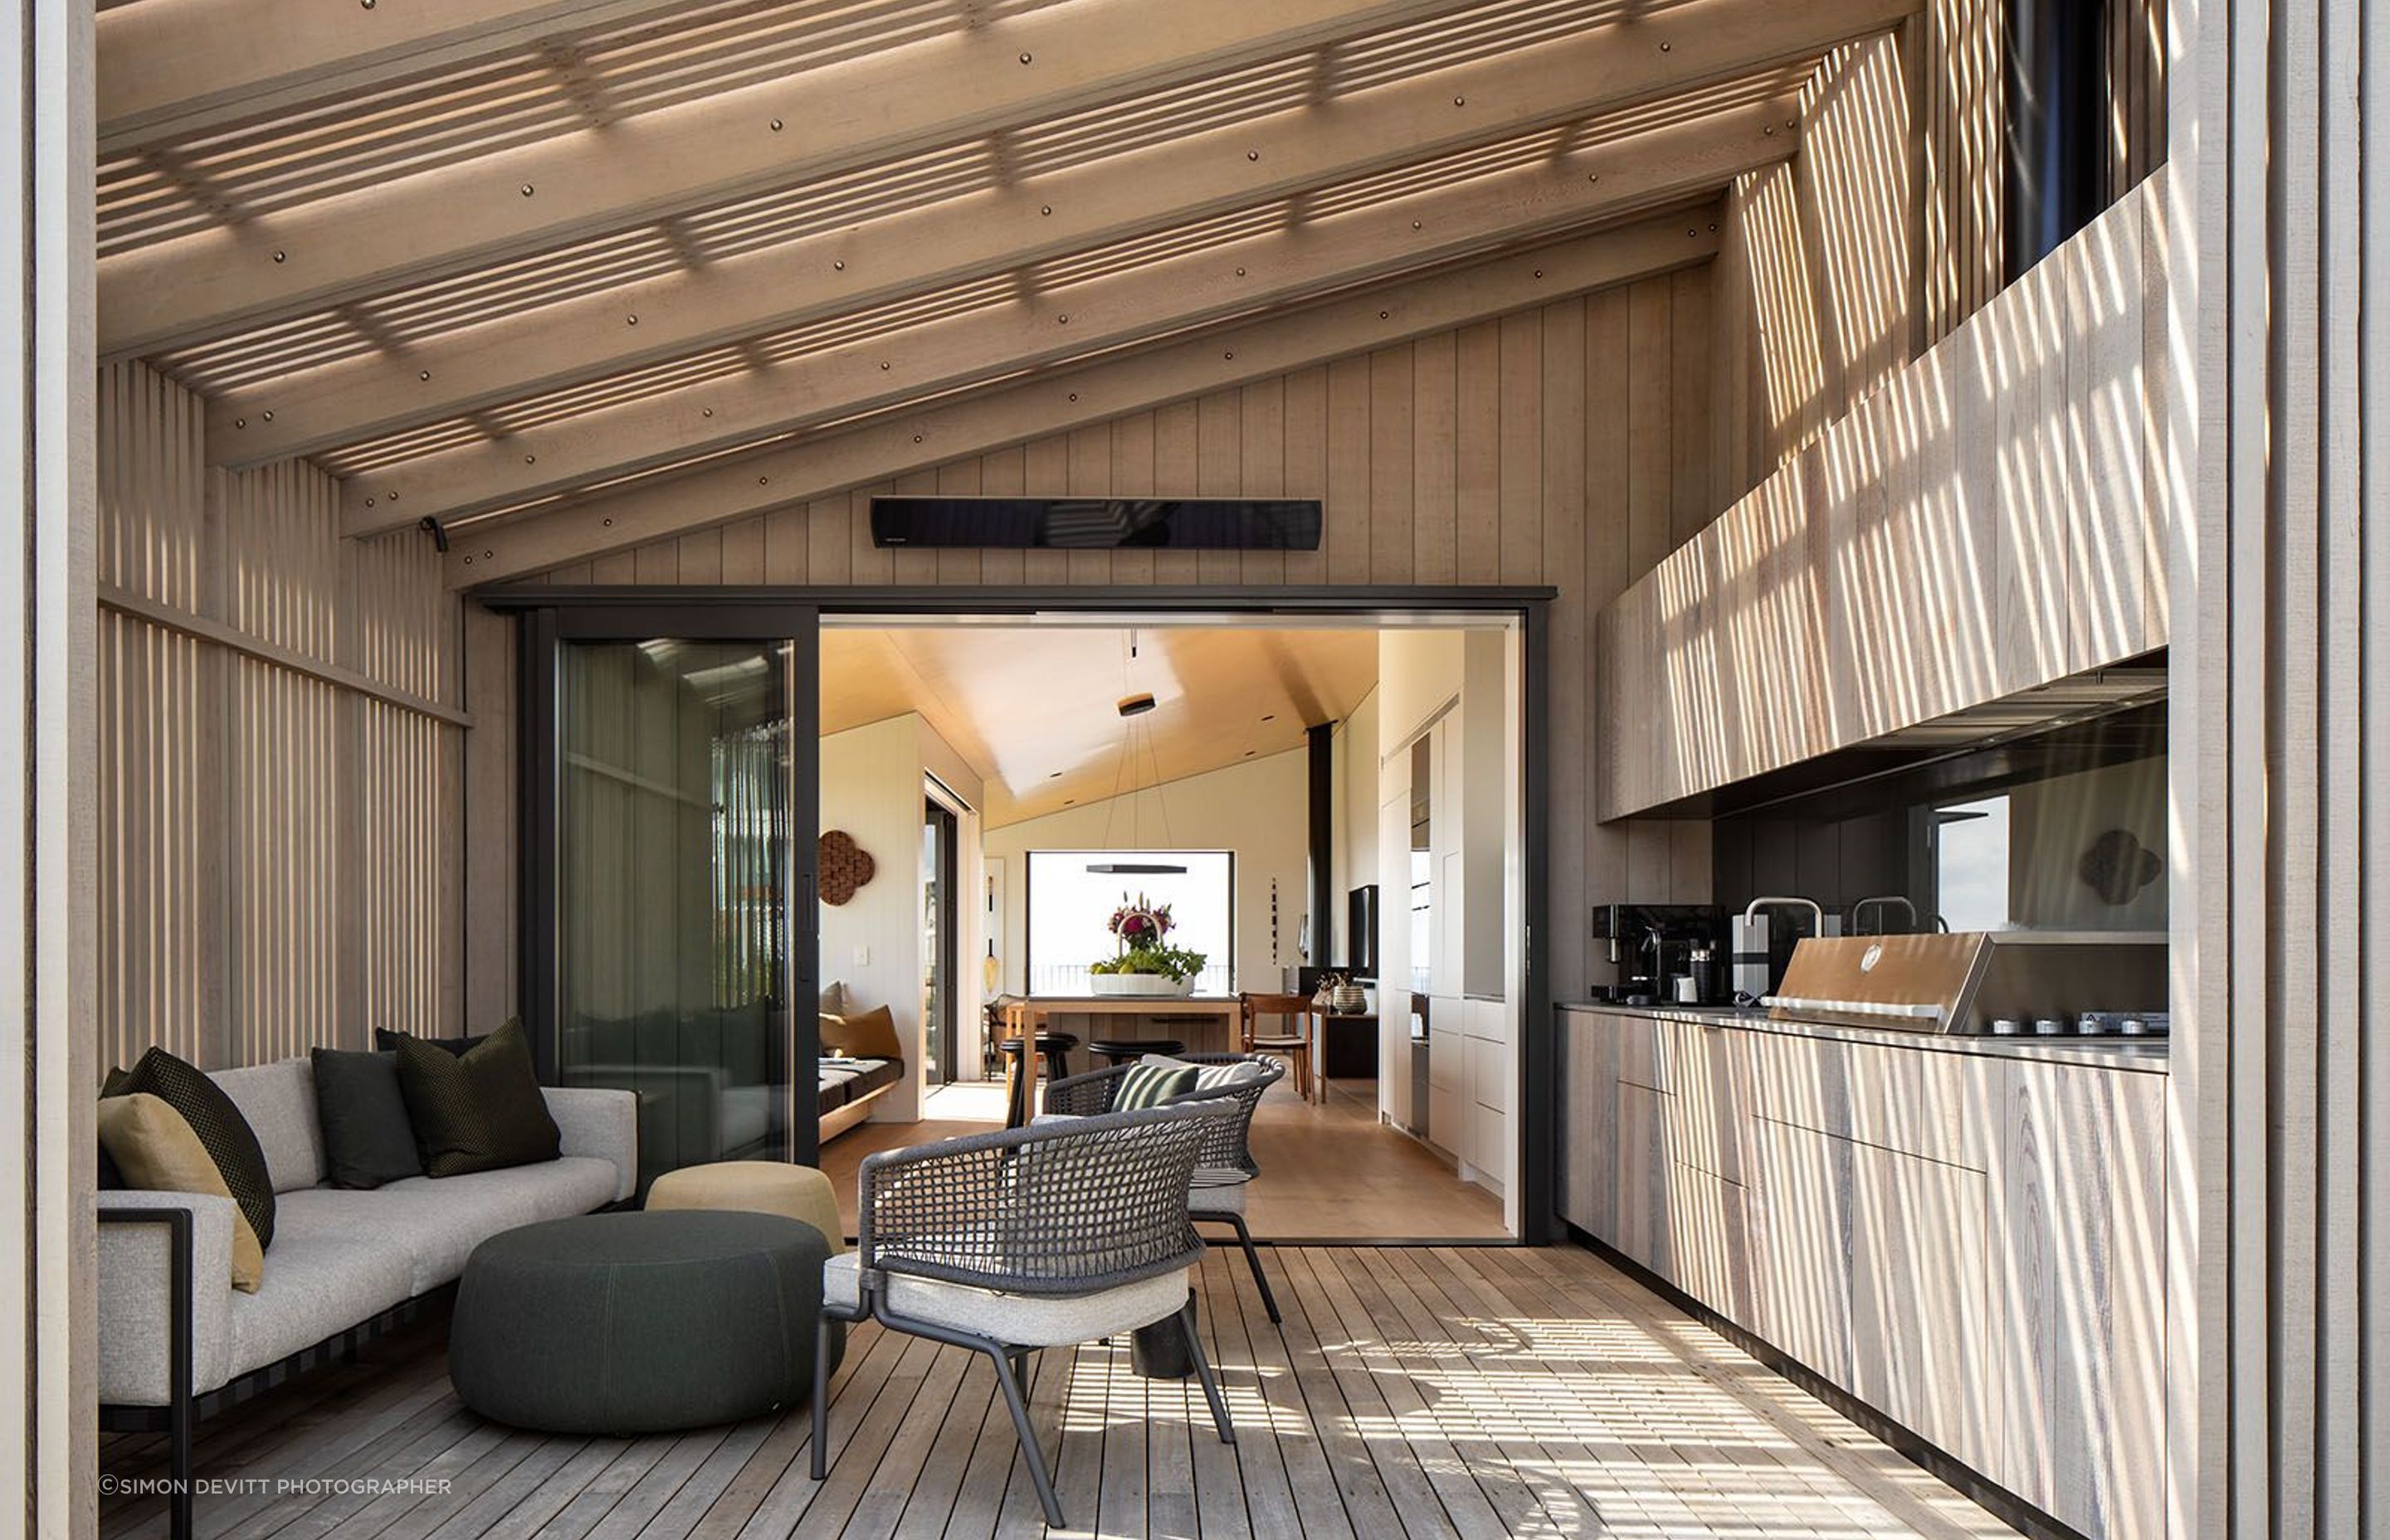 The kitchen projects through the building envelope and out onto layered and screened outdoor living spaces—helping blur the lines between indoor spaces and outdoor spaces.